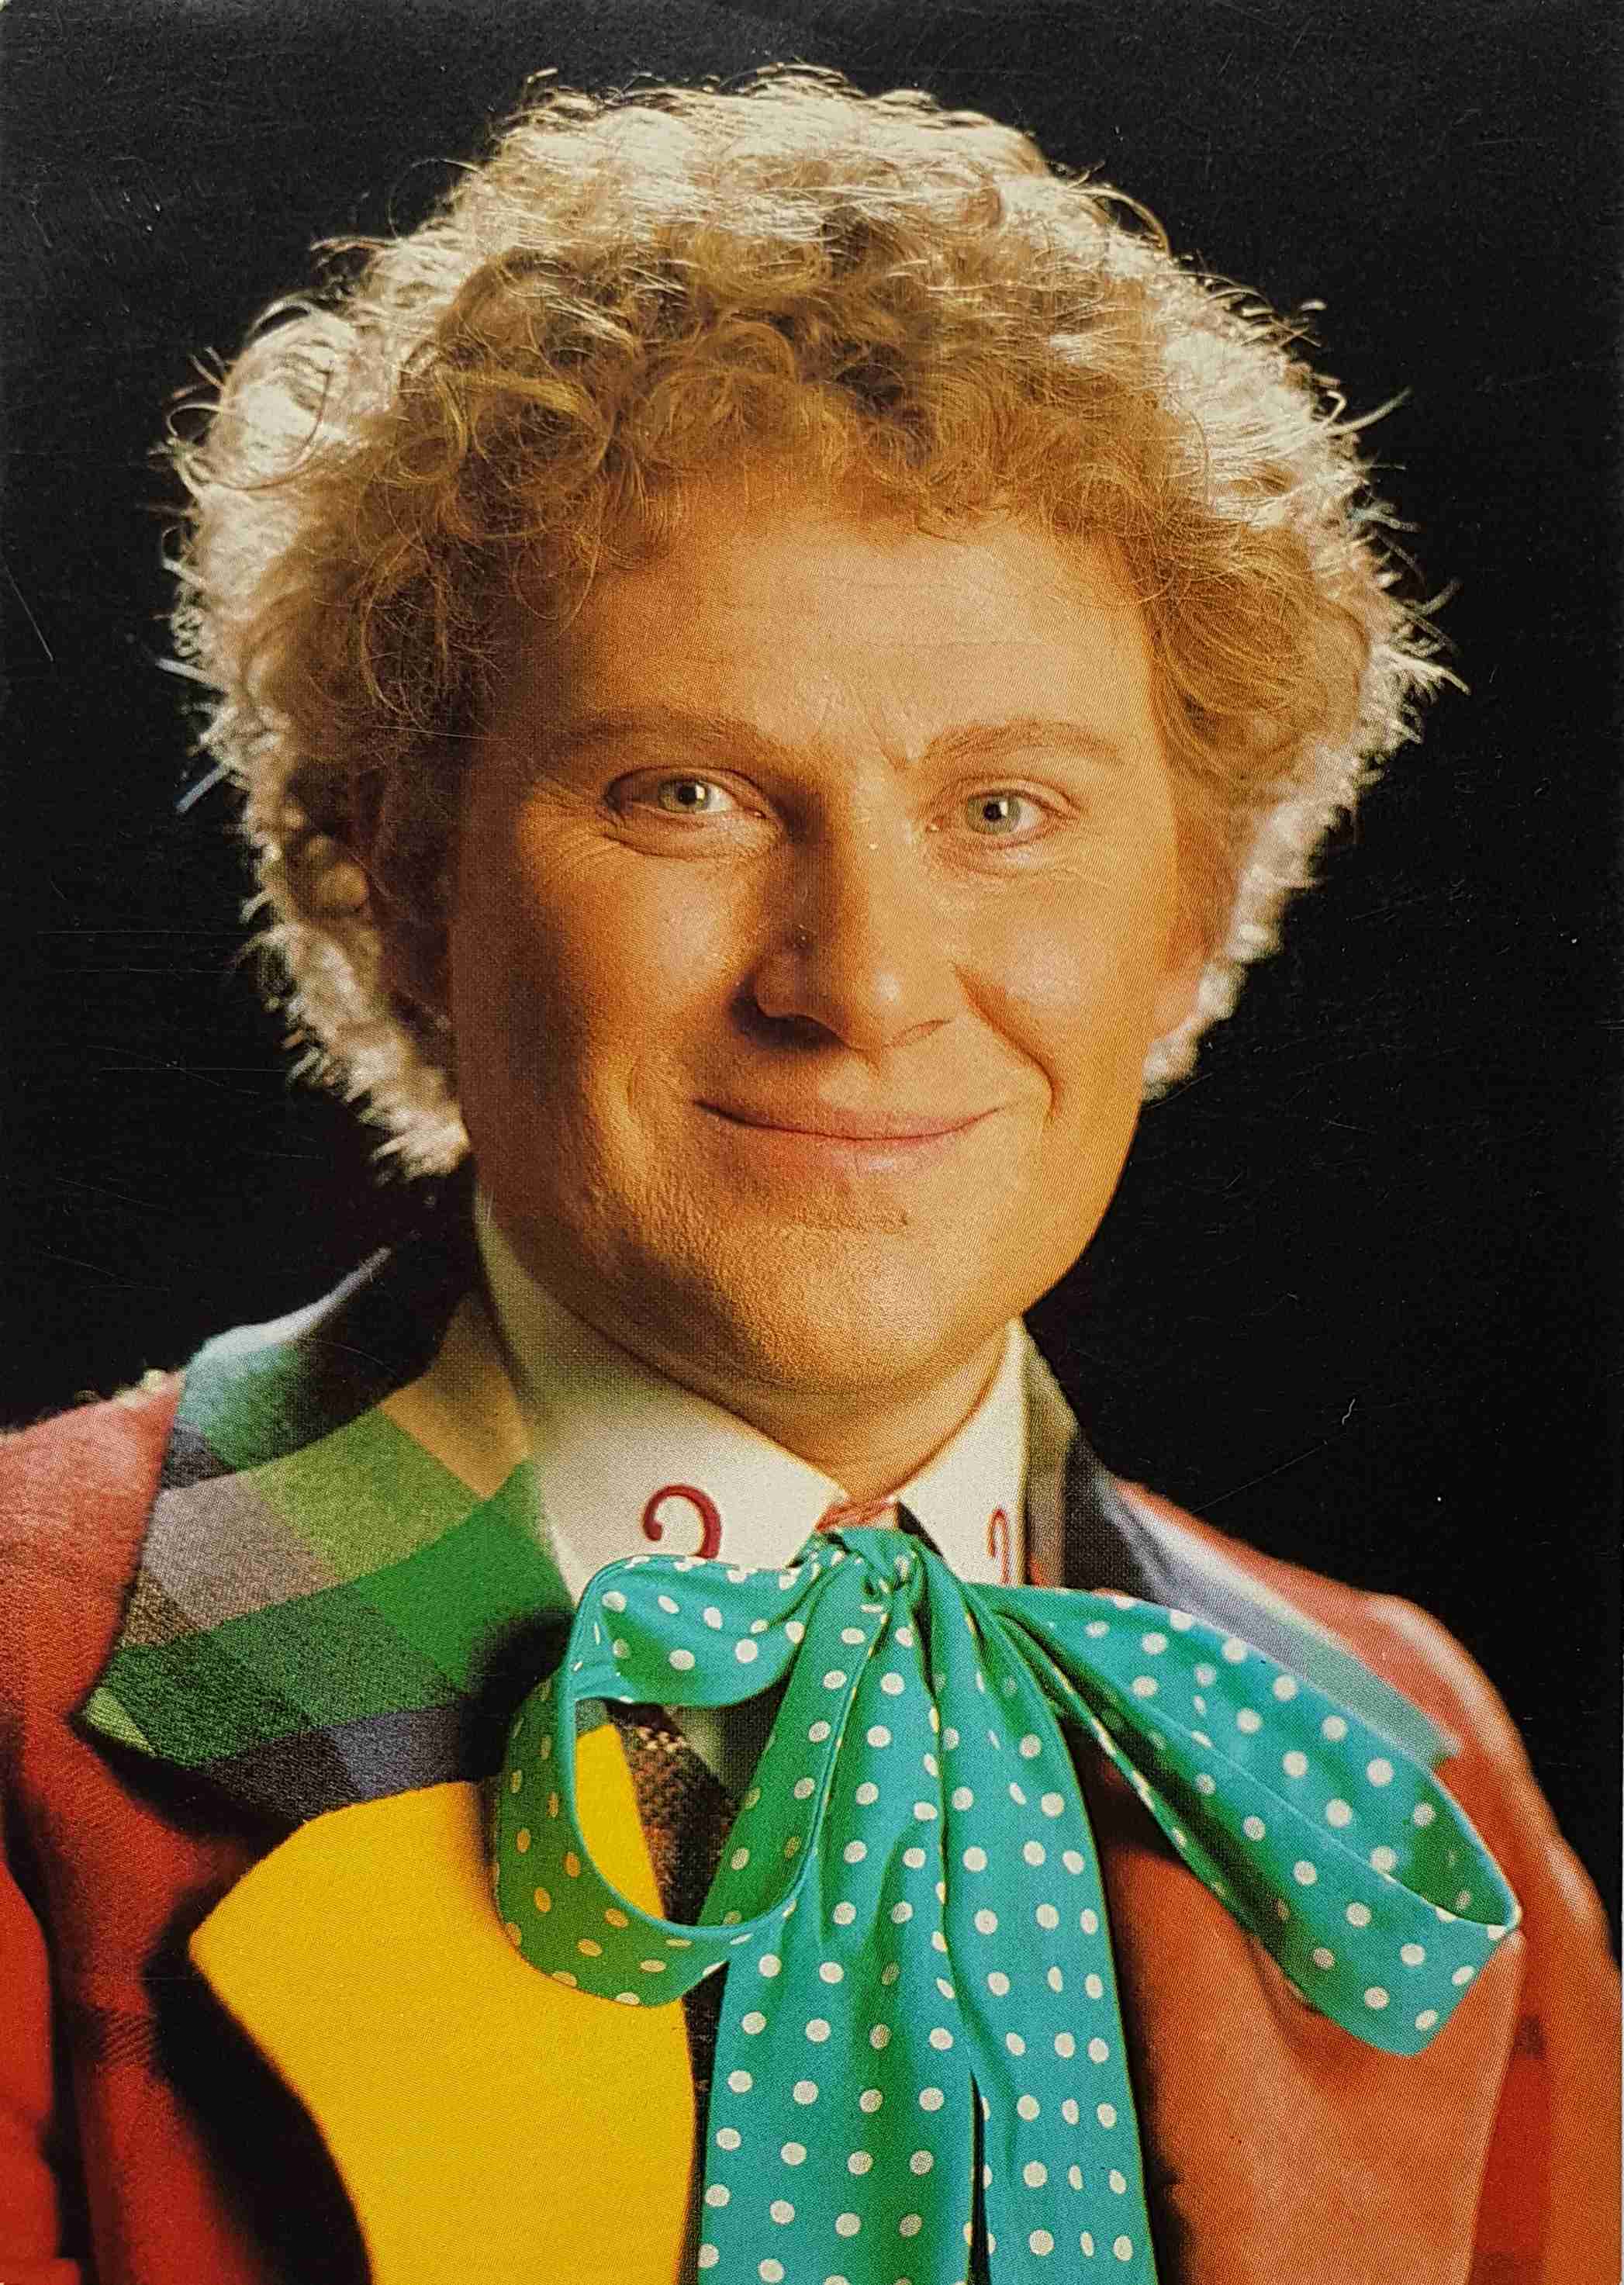 Picture of PC-DW-CB Doctor Who - Colin Baker by artist Unknown from the BBC records and Tapes library